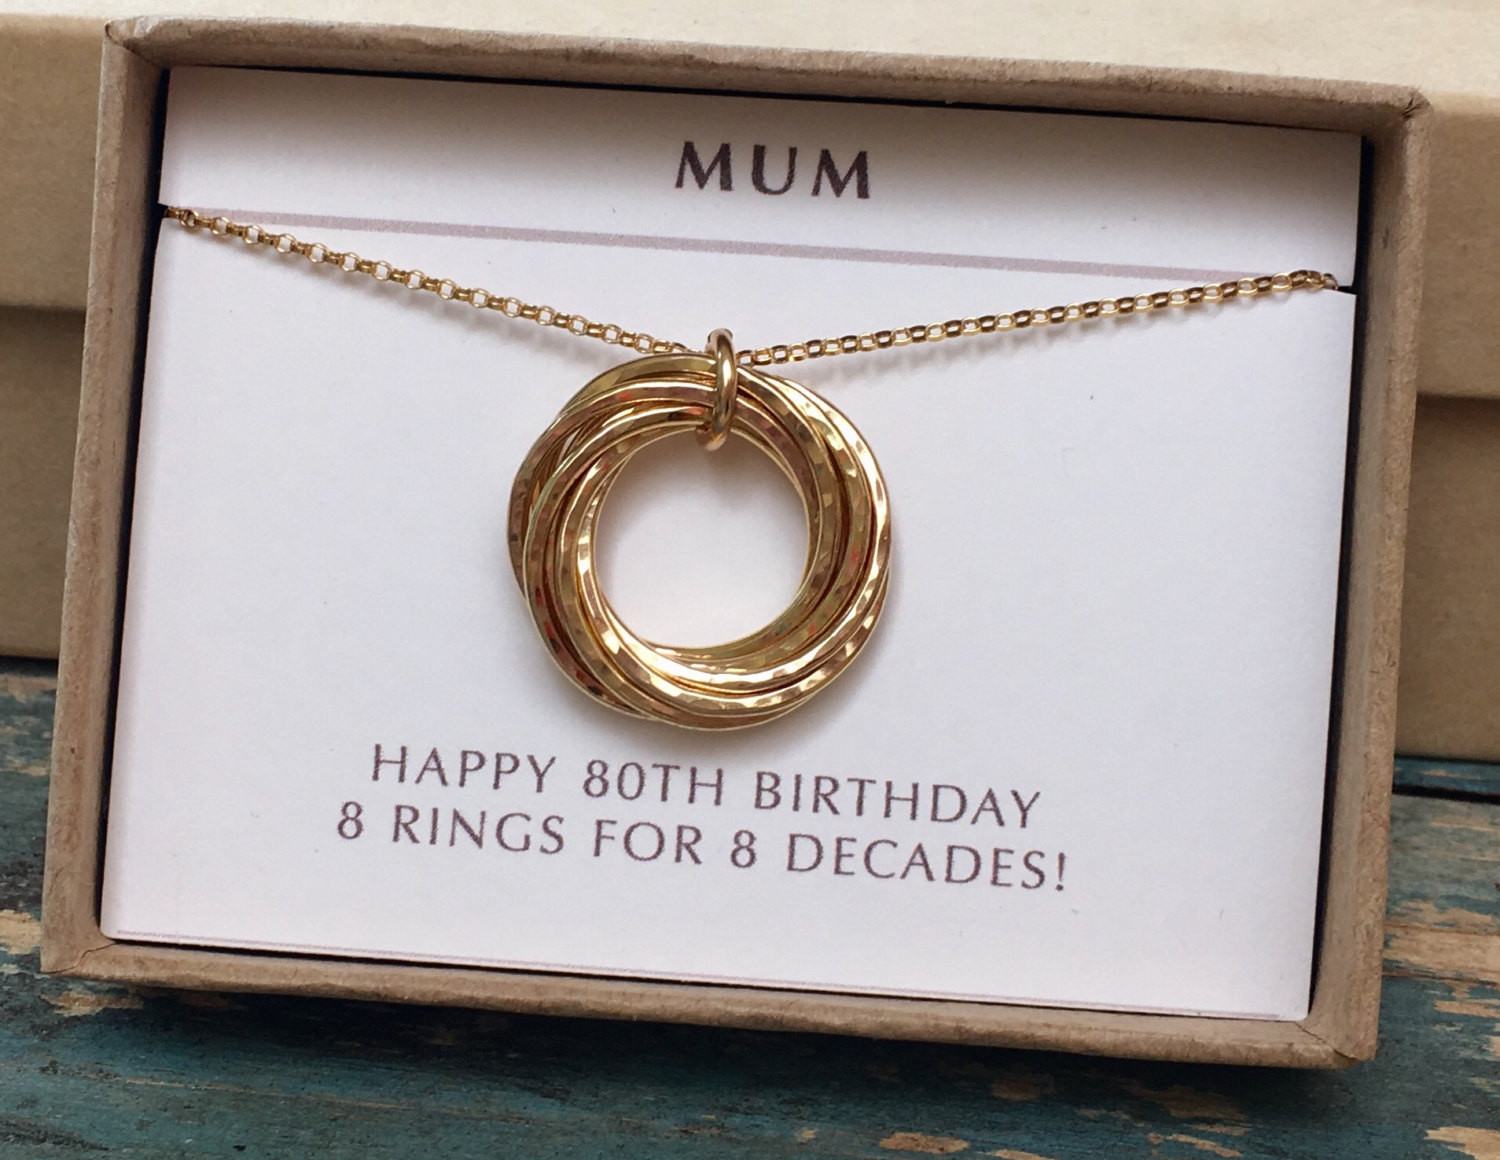 80th Birthday Gift Ideas For Mom
 The top 20 Ideas About 80th Birthday Gifts for Mom Best